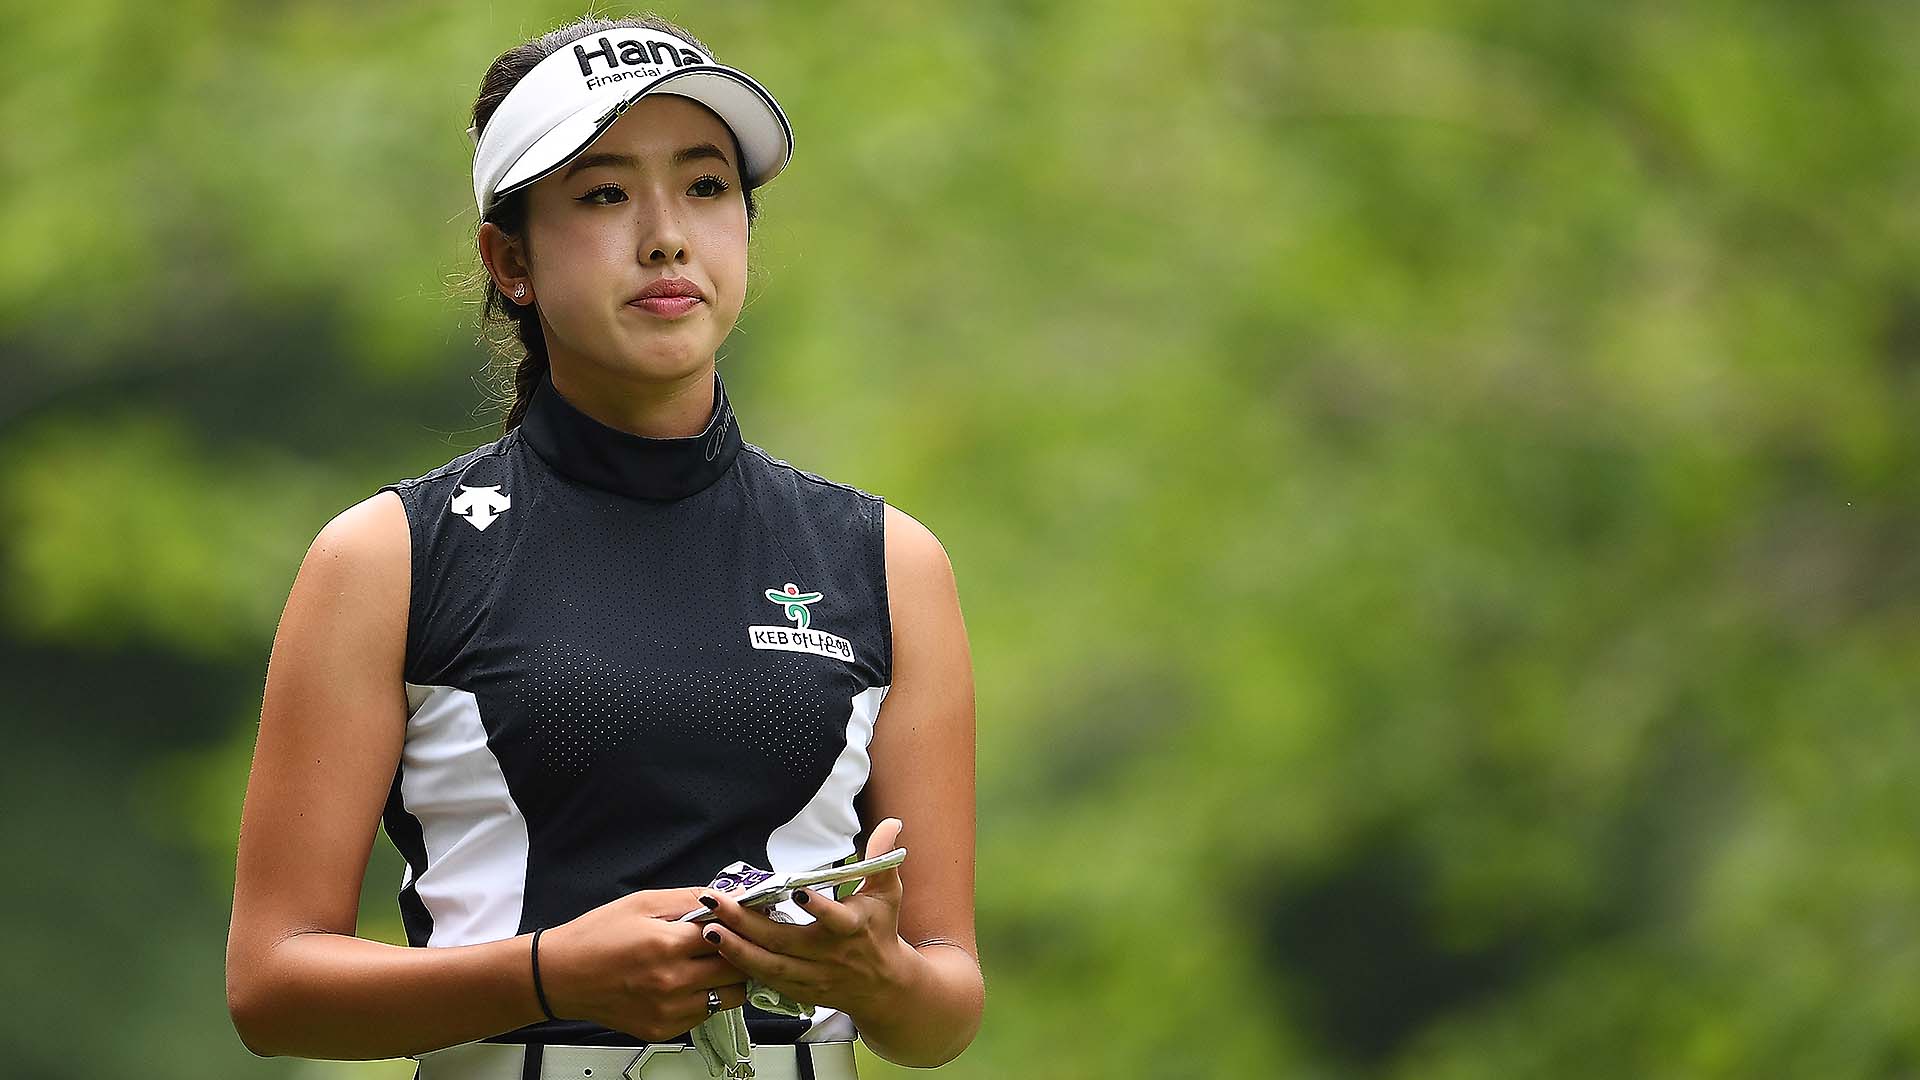 Report: LPGA rookie Yealimi Noh hit with $10,000 fine for slow play